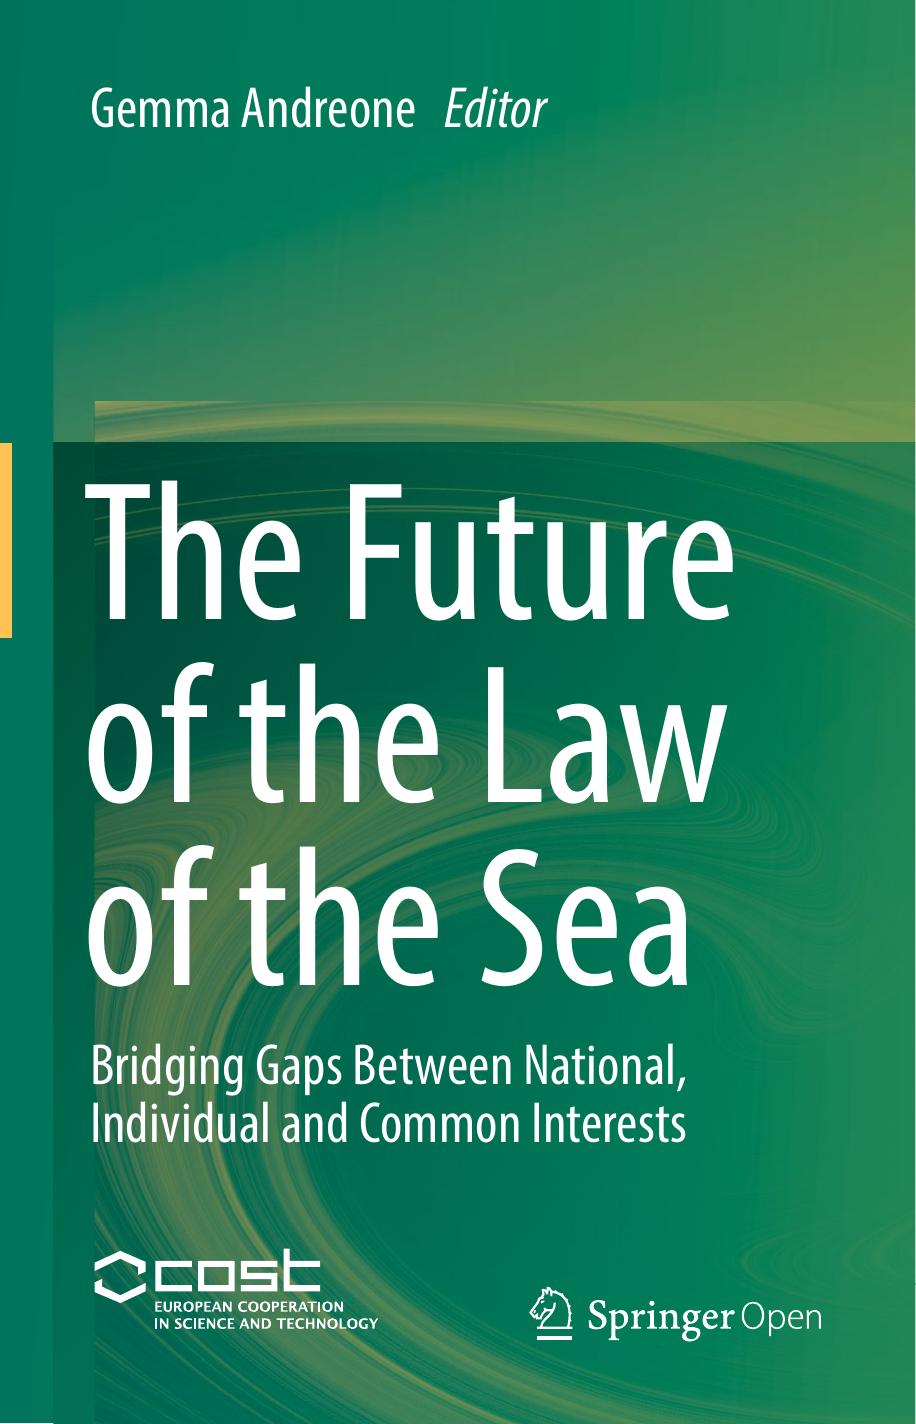 The Future of the Law of the Sea by Gemma Andreone